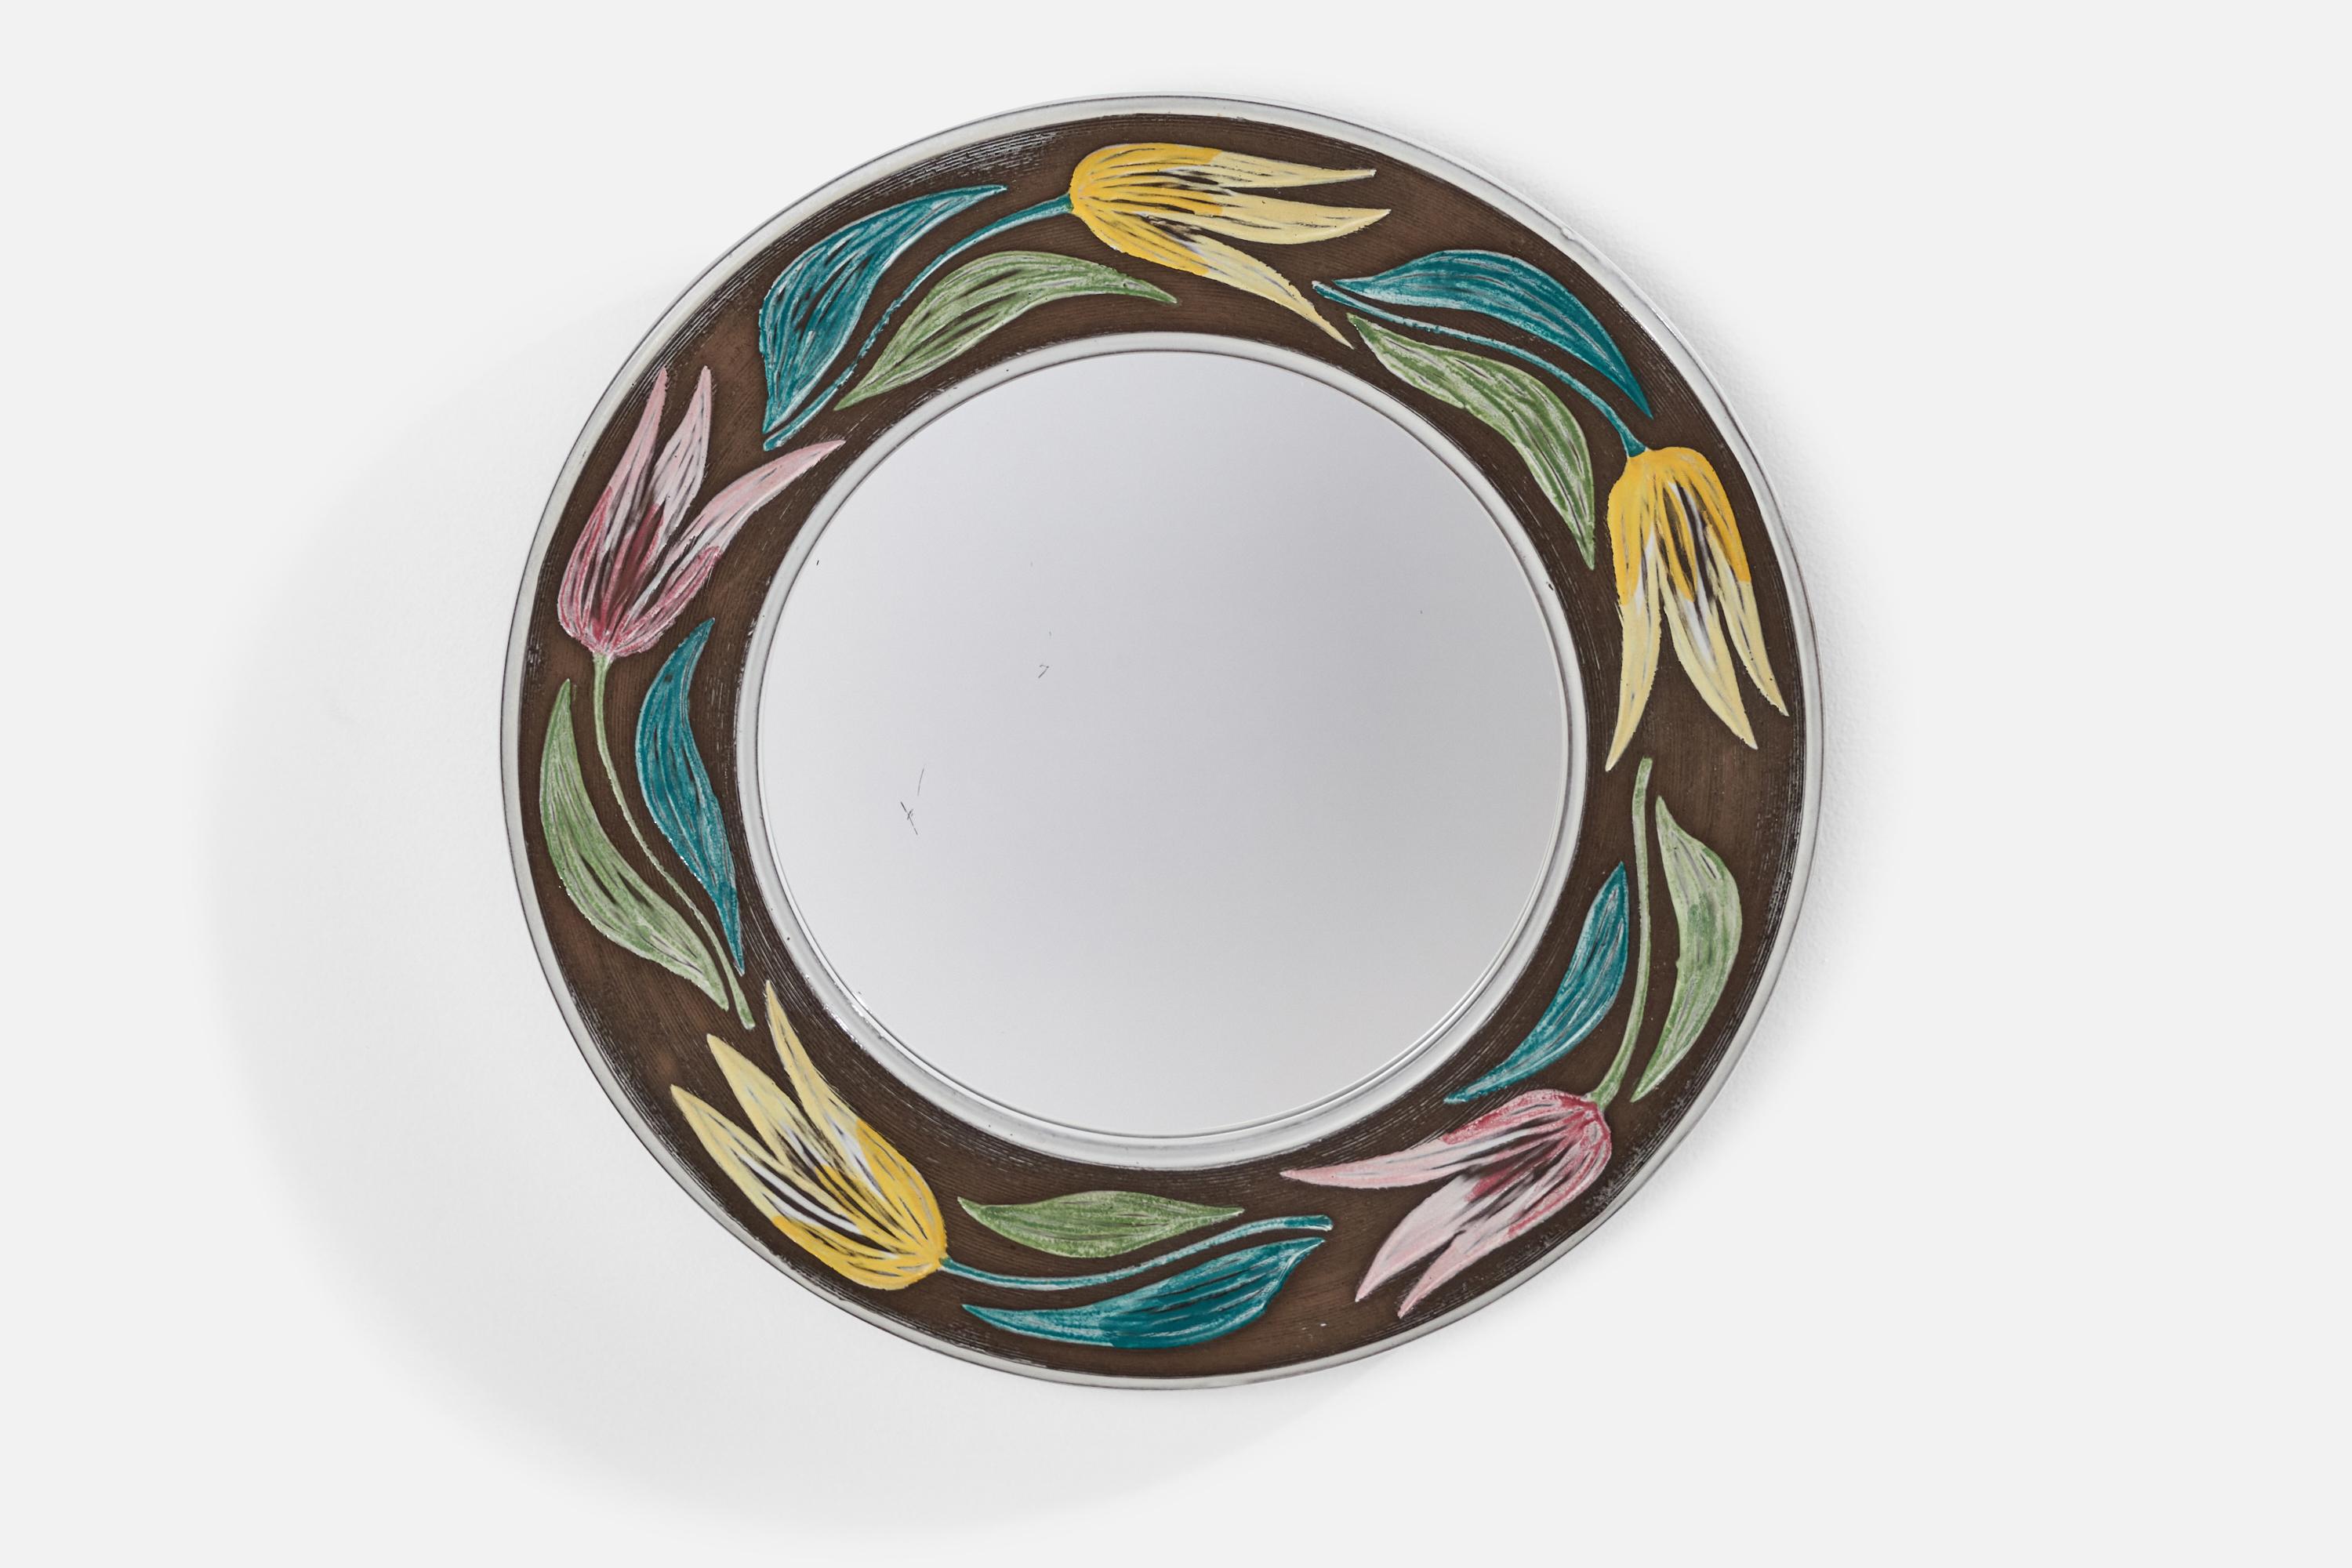 A blue green pink yellow and grey painted ceramic mirror designed by Mari Simmulson and produced by Turitz & Co, Sweden, c. 1960s.